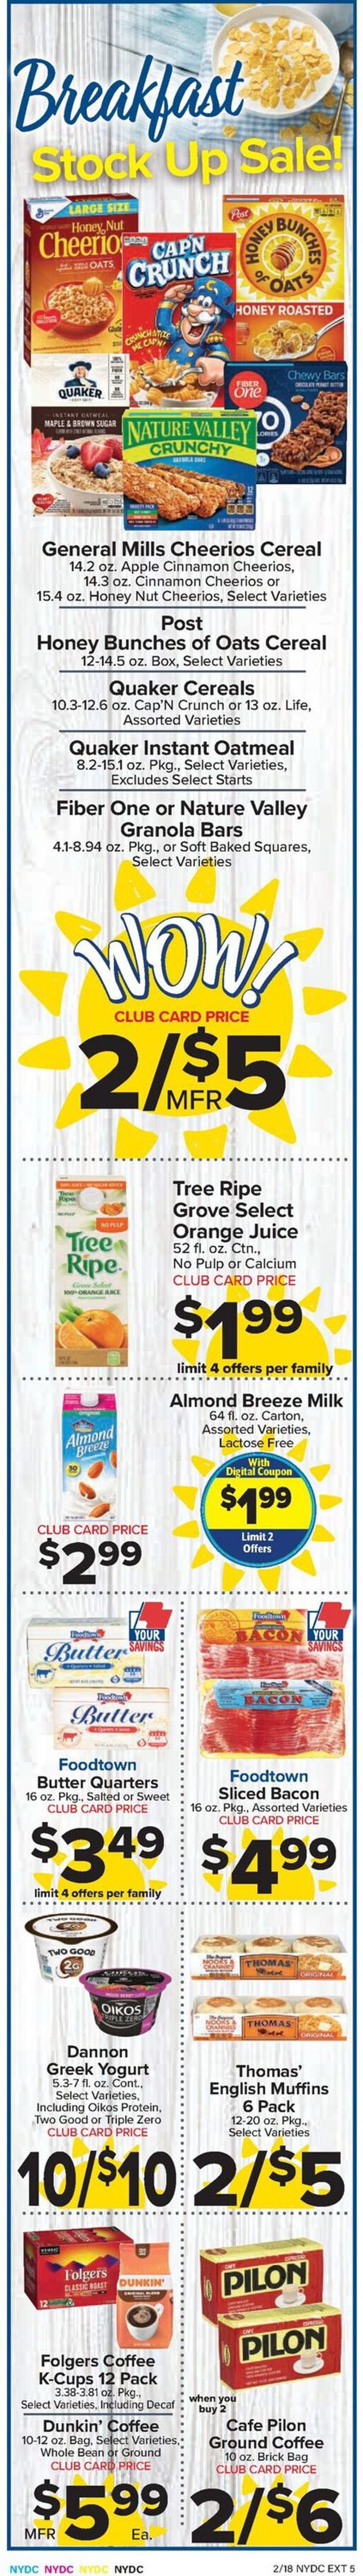 Foodtown Ad from 02/18/2022